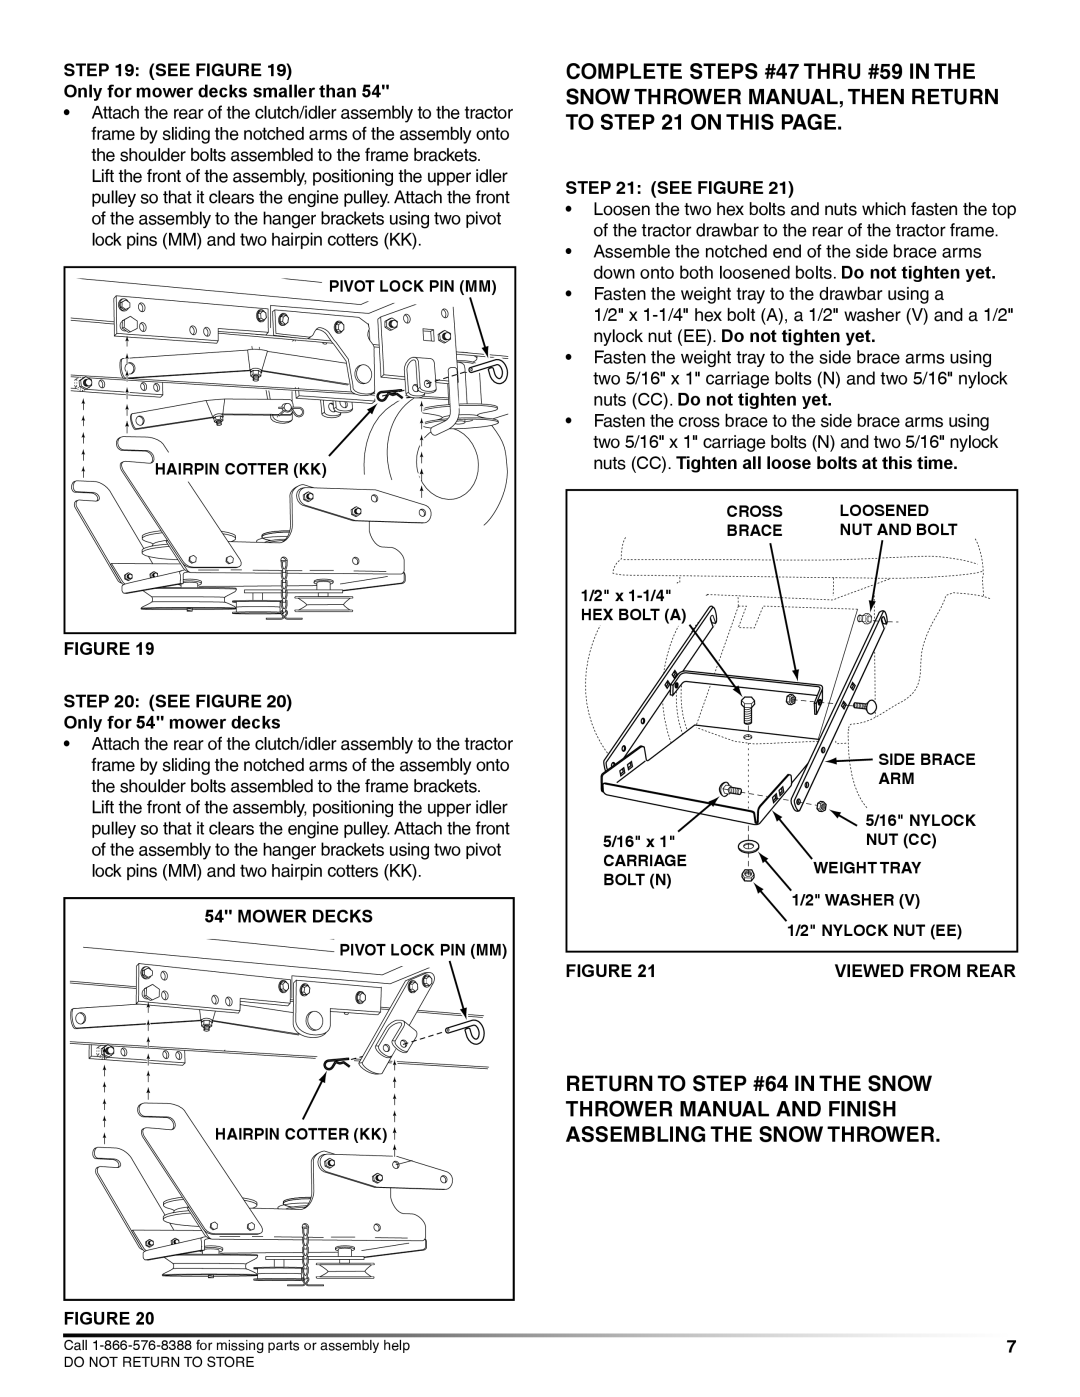 Craftsman 71-24831 See Figure, Only for mower decks smaller than, Only for 54 mower decks, Mower Decks, Viewed From Rear 